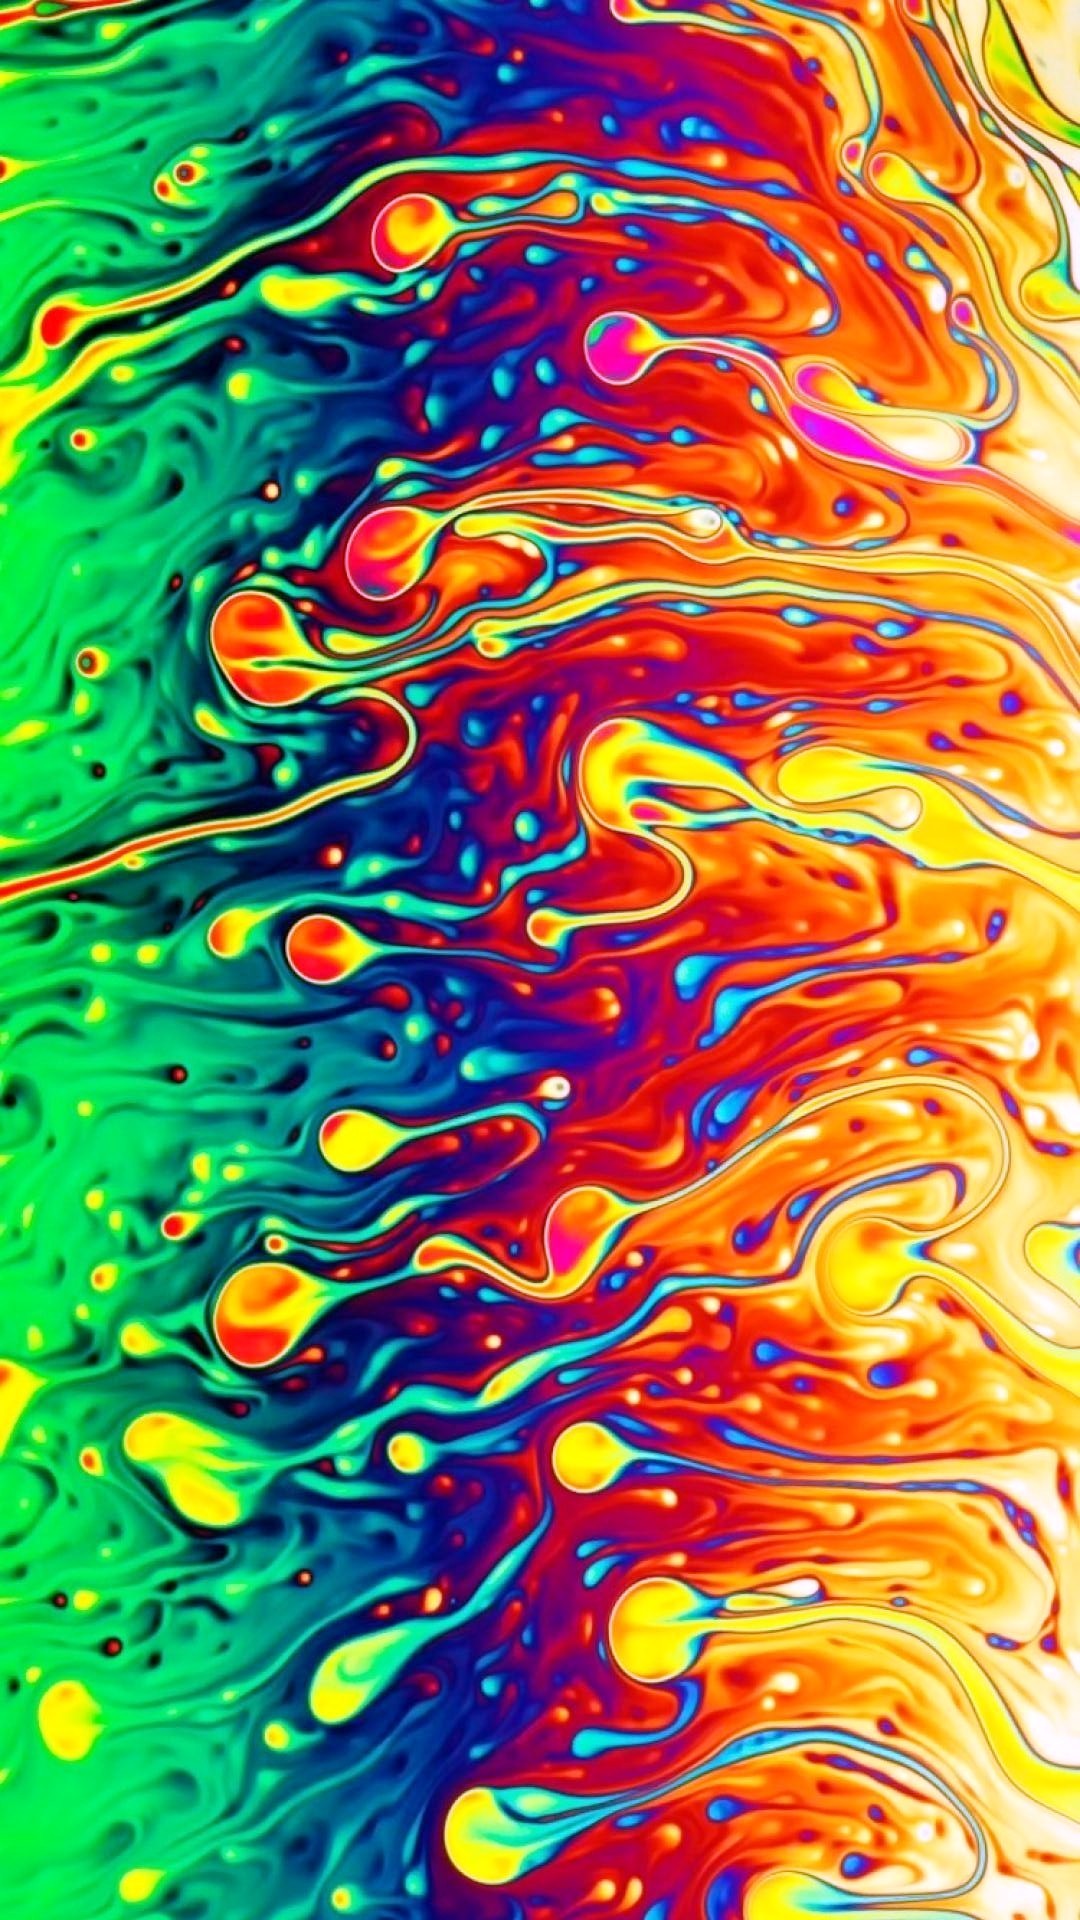 Liquid Art Wallpaper For Phone HD with high-resolution 1080x1920 pixel. Download all Mobile Wallpapers and Use them as wallpapers for your iPhone, Tablet, iPad, Android and other mobile devices